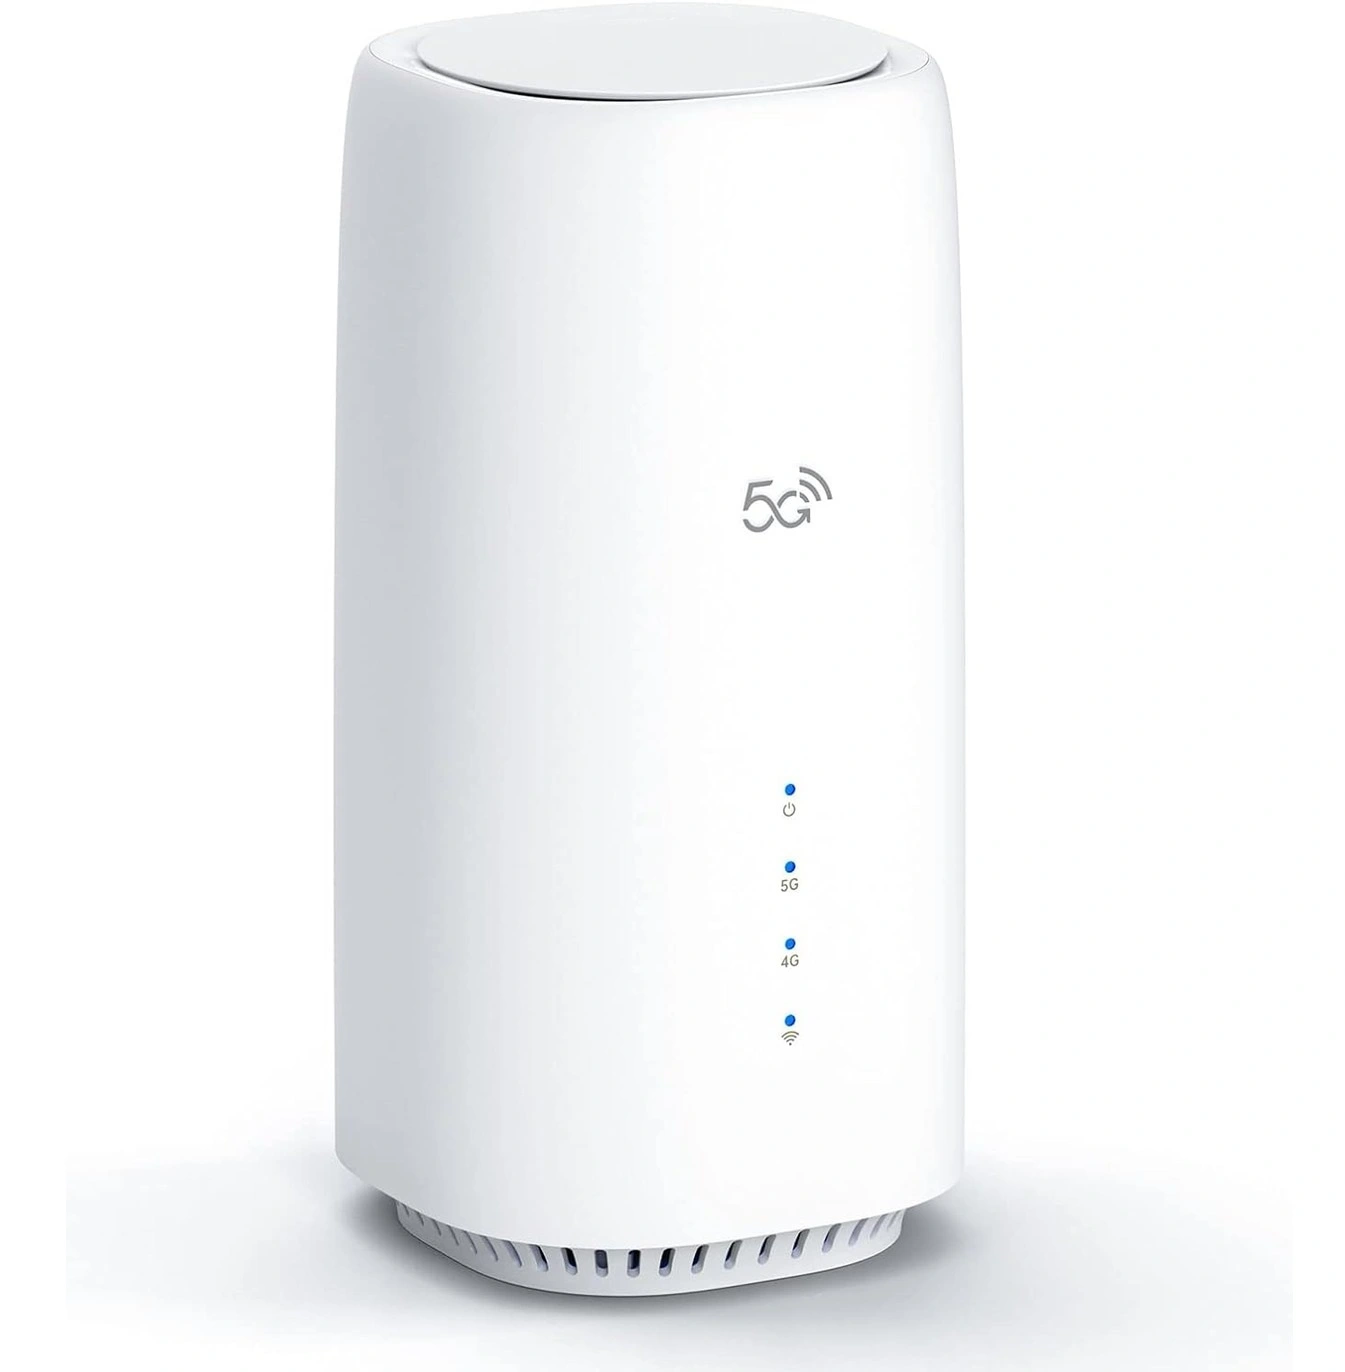 5G Wifi Router for internet